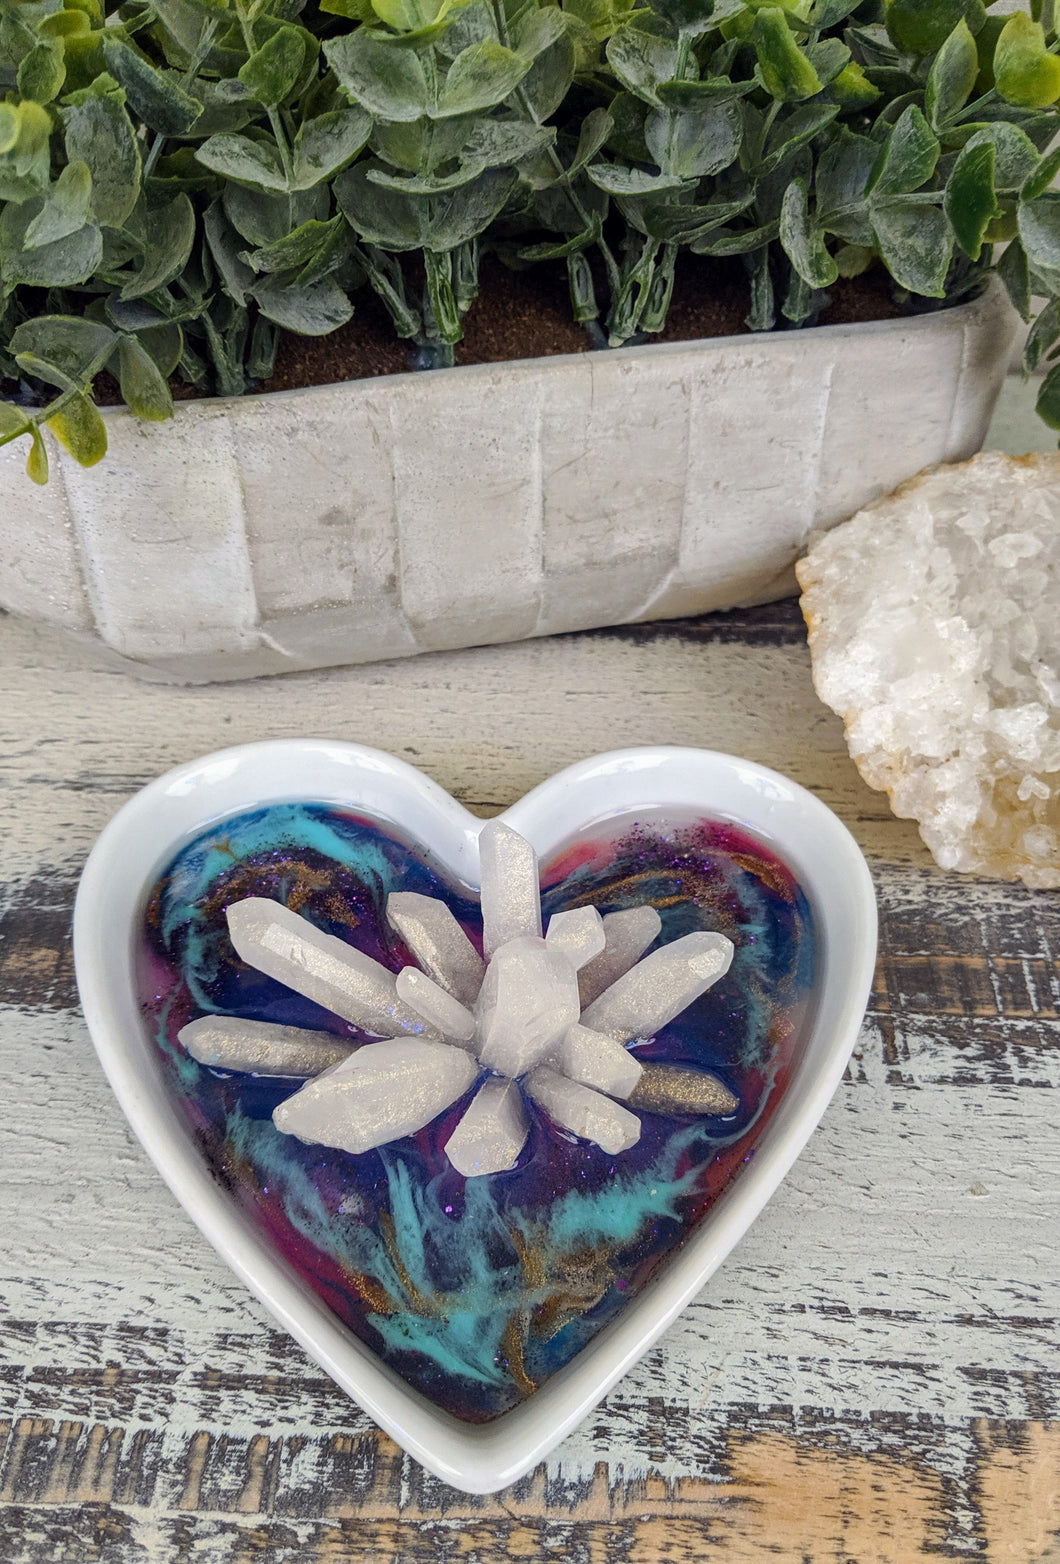 Ring Dish - Heart teal, purple red - Sold